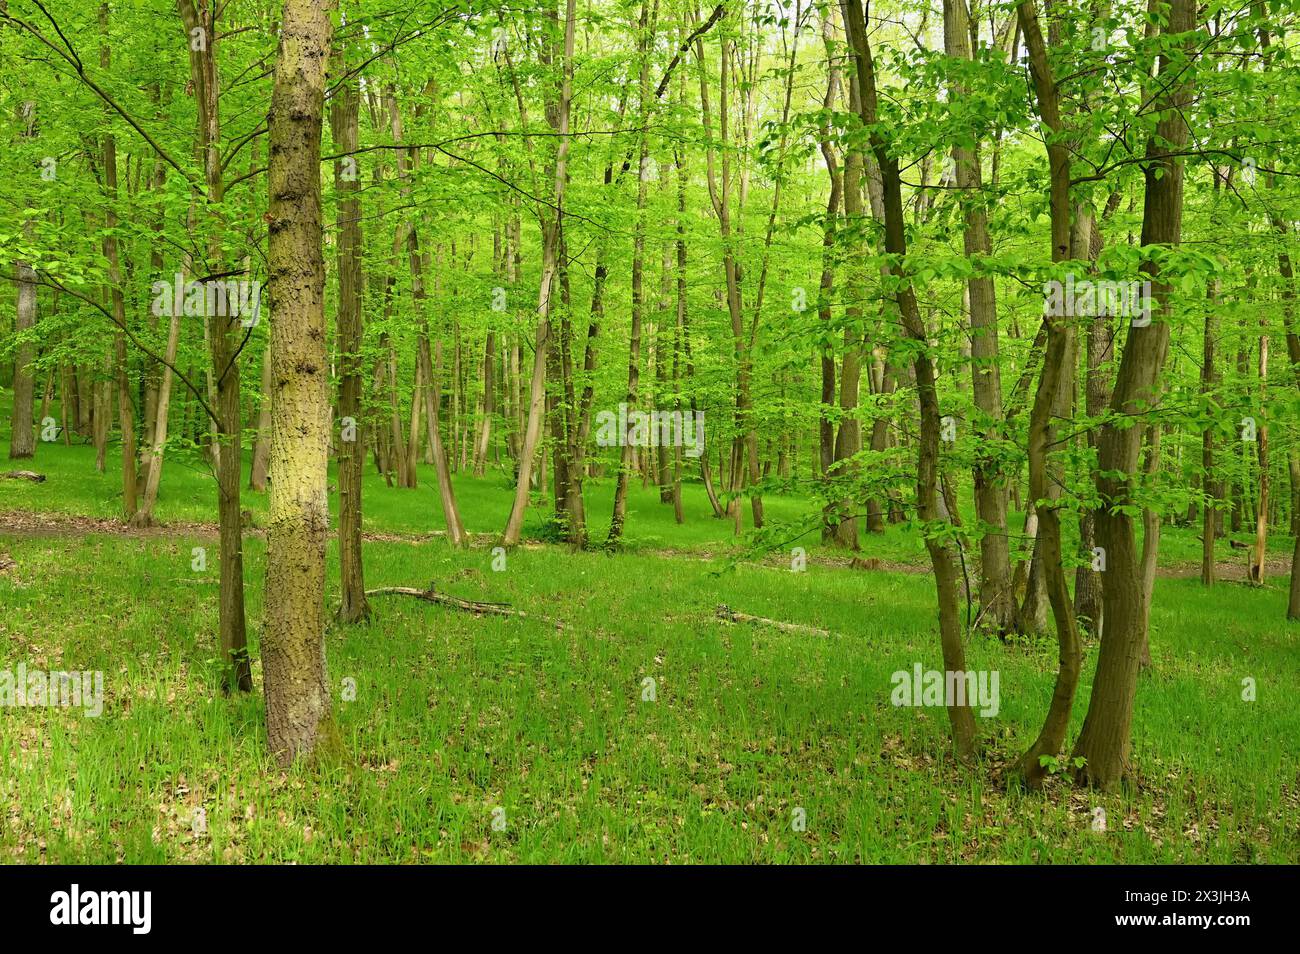 Beautiful green forest with trees in the background. Concept for nature and environment. Spring in the forest landscape. Stock Photo